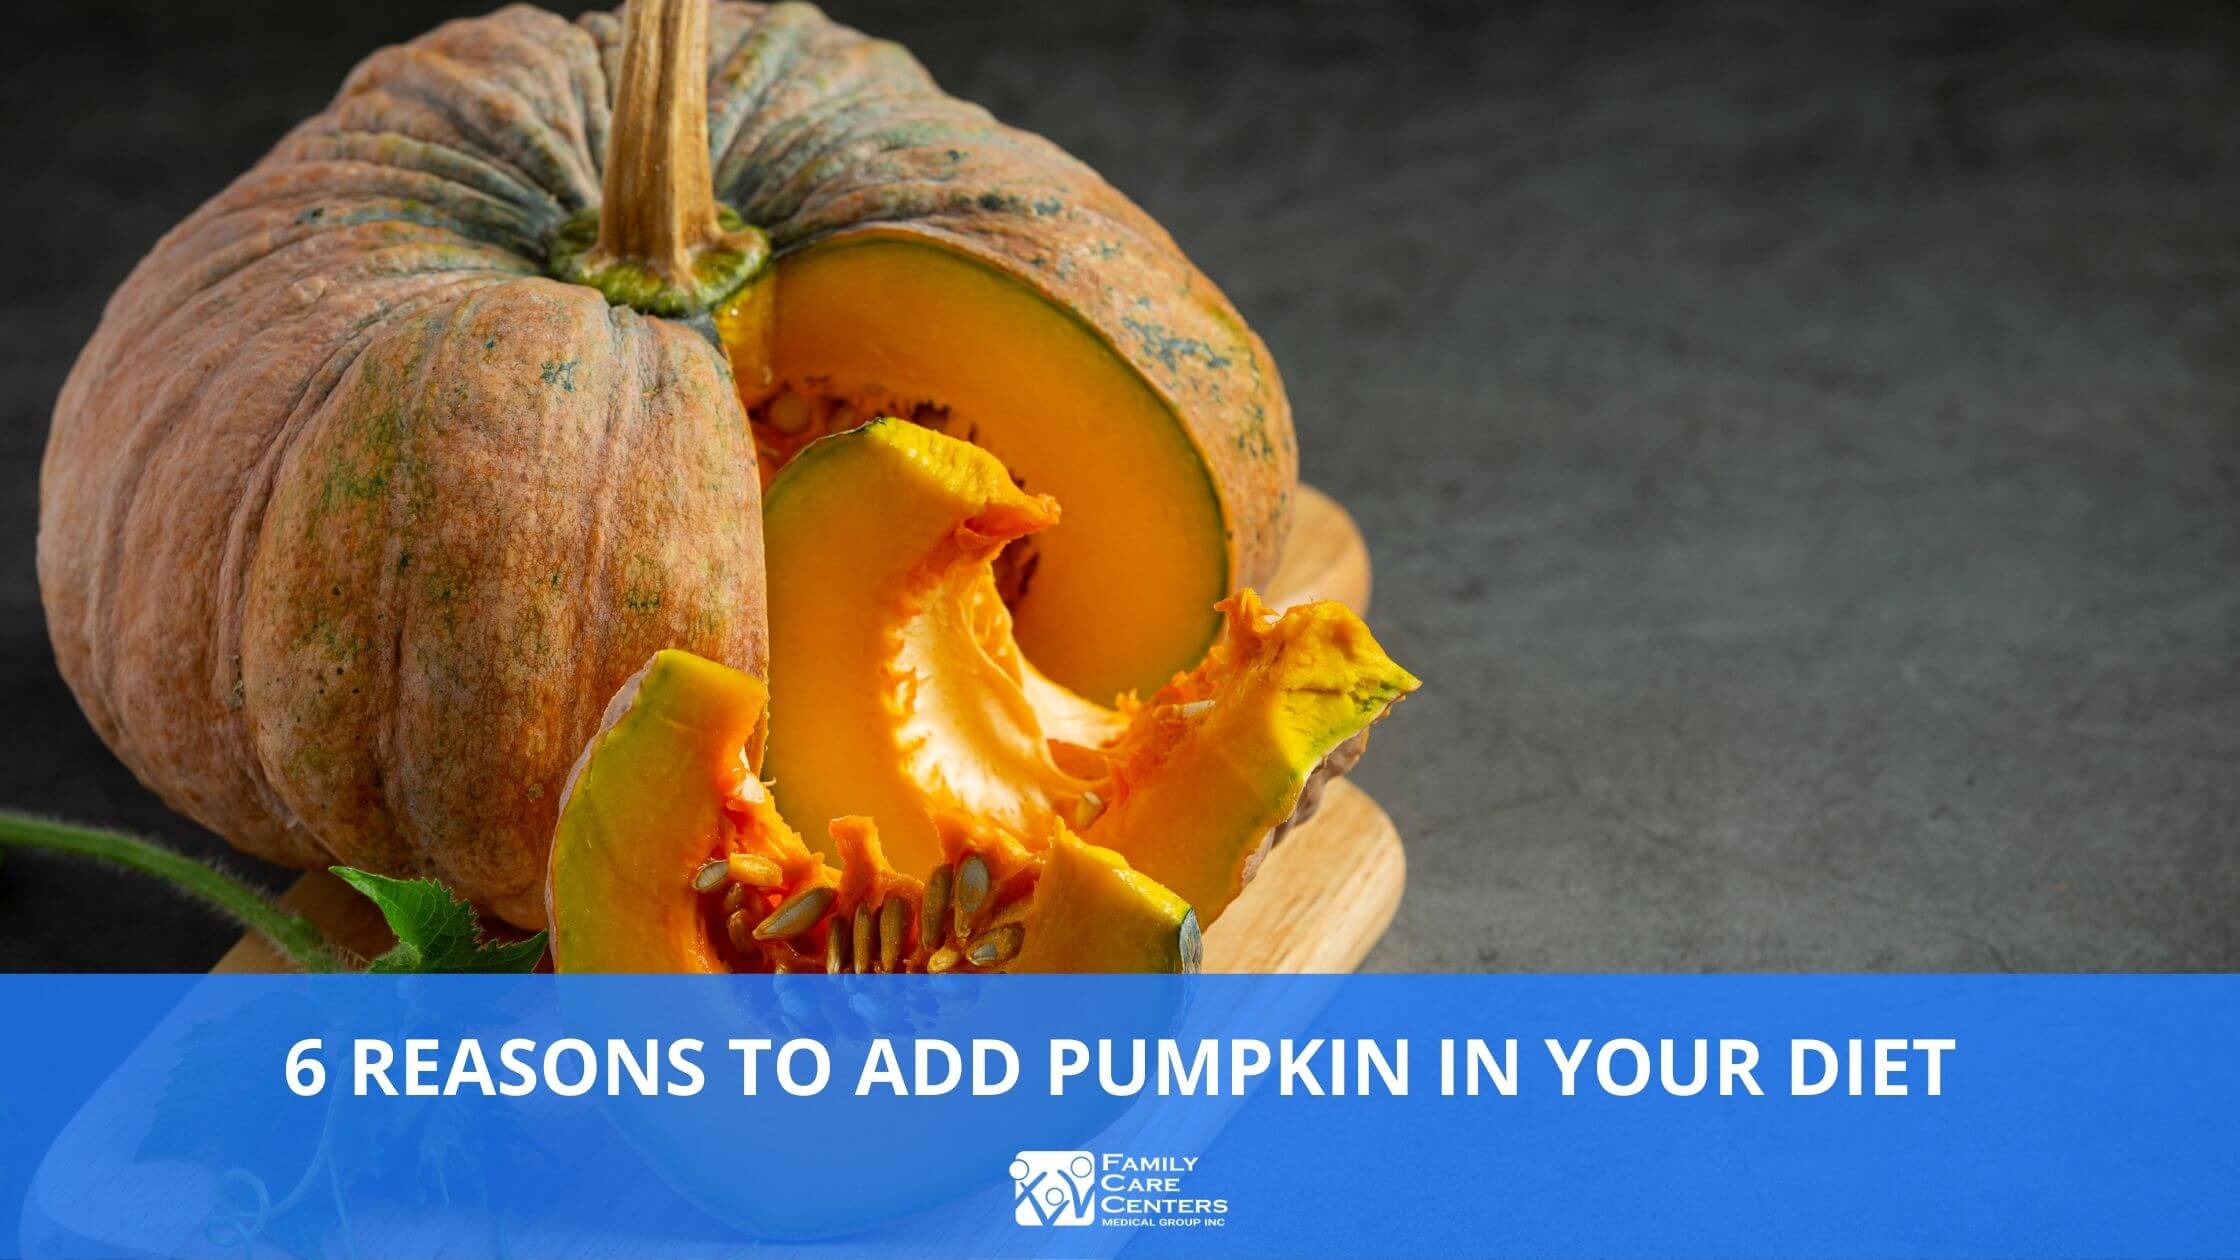 6 Reasons to Add Pumpkin in Your Diet